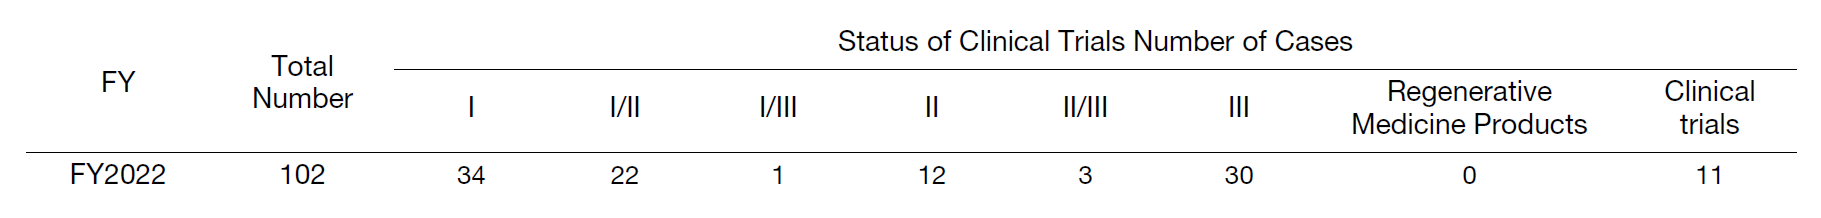 Table 2. Status of New Clinical Trials